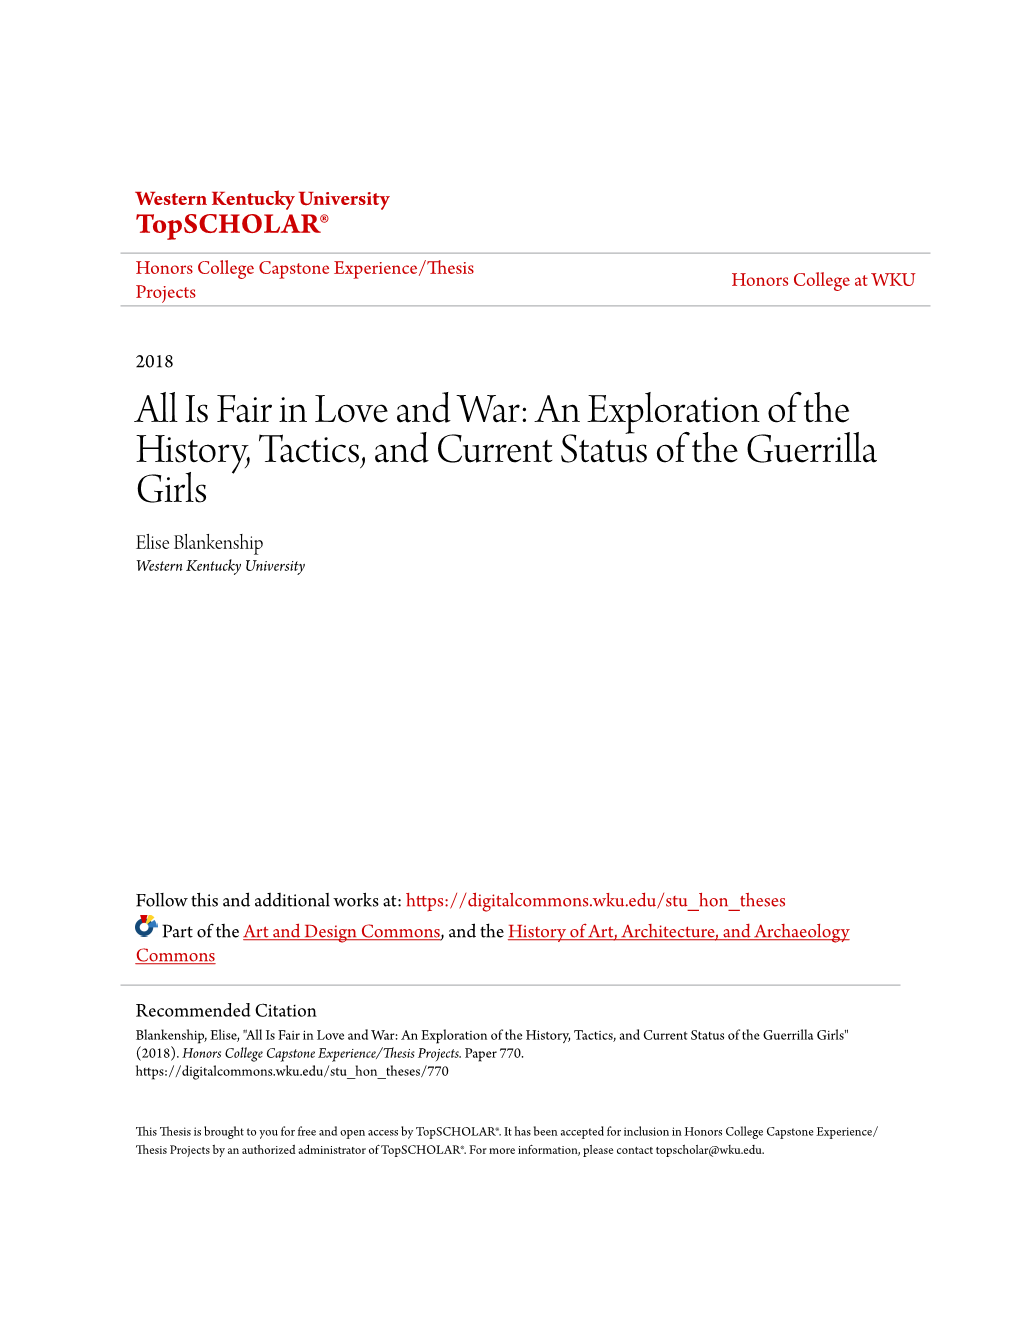 All Is Fair in Love and War: an Exploration of the History, Tactics, and Current Status of the Guerrilla Girls Elise Blankenship Western Kentucky University